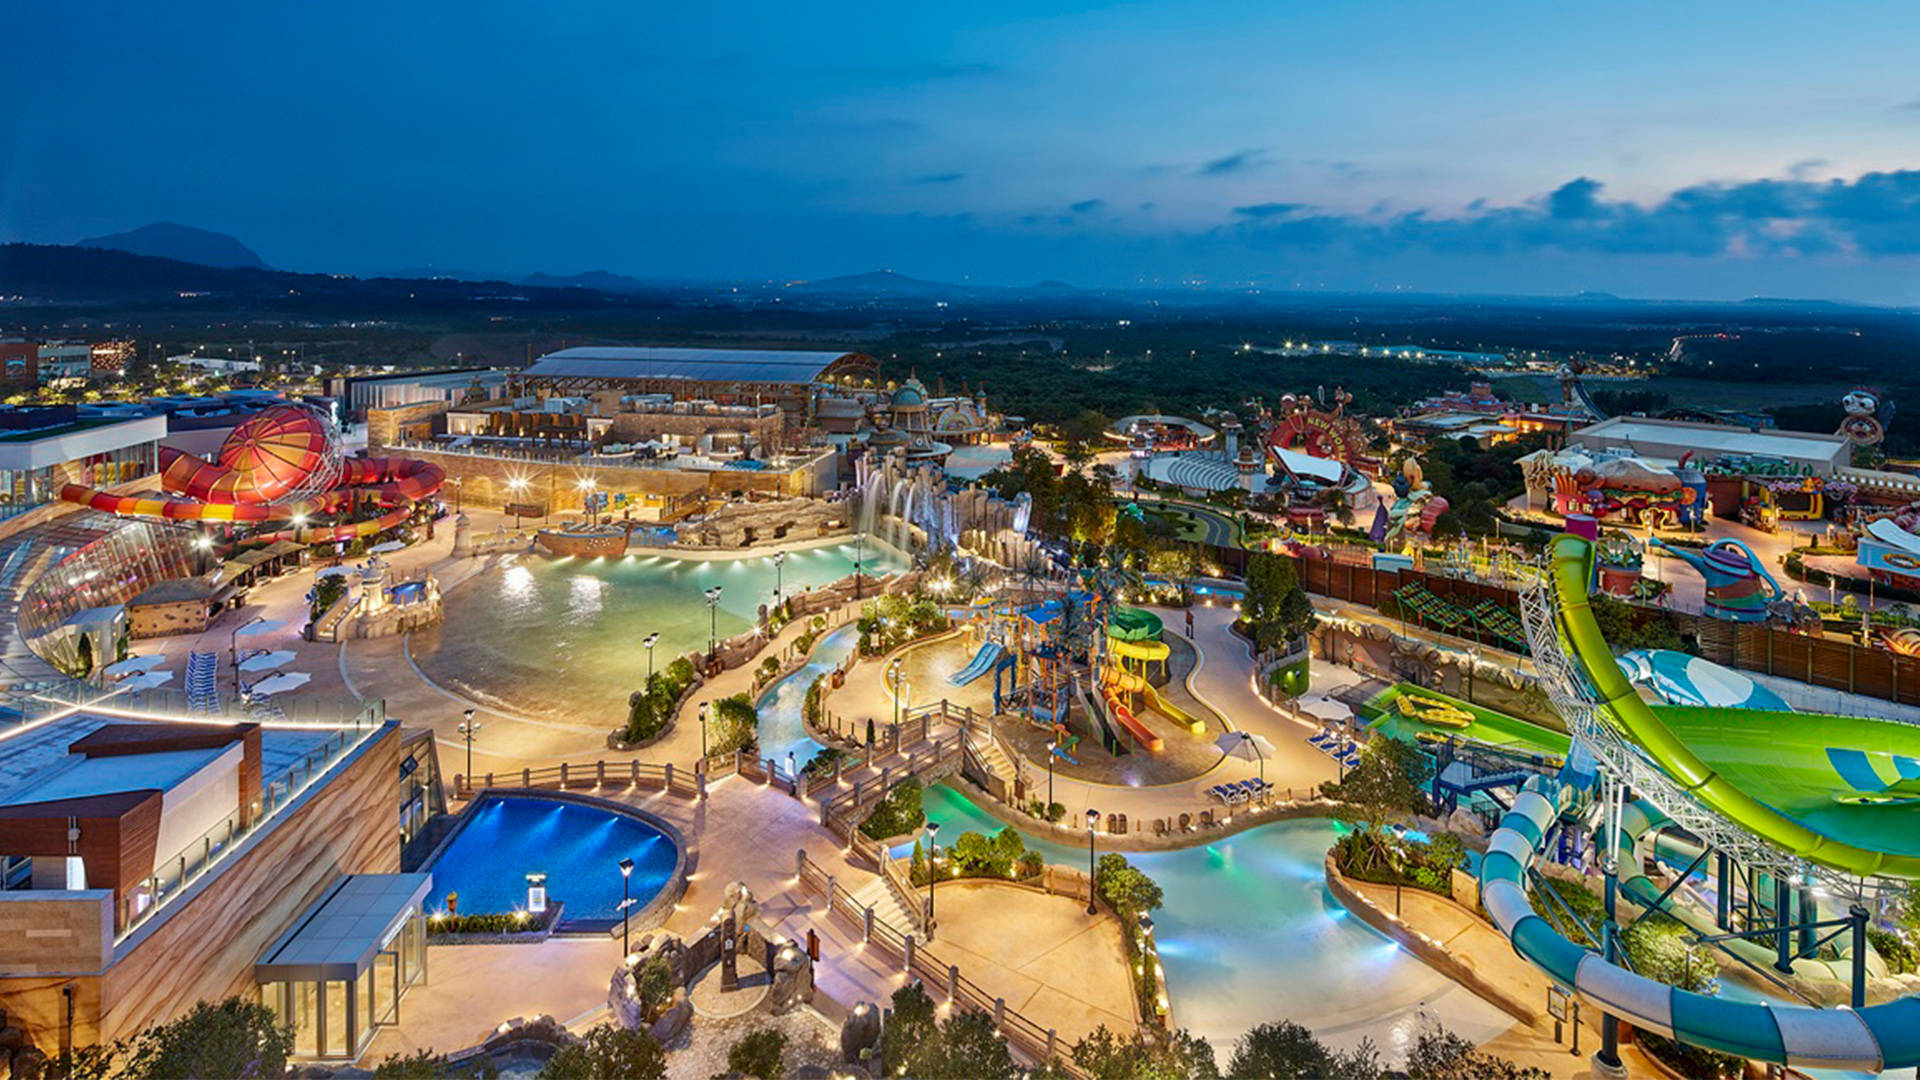 Enthralling View Of A Waterpark At Jeju Island